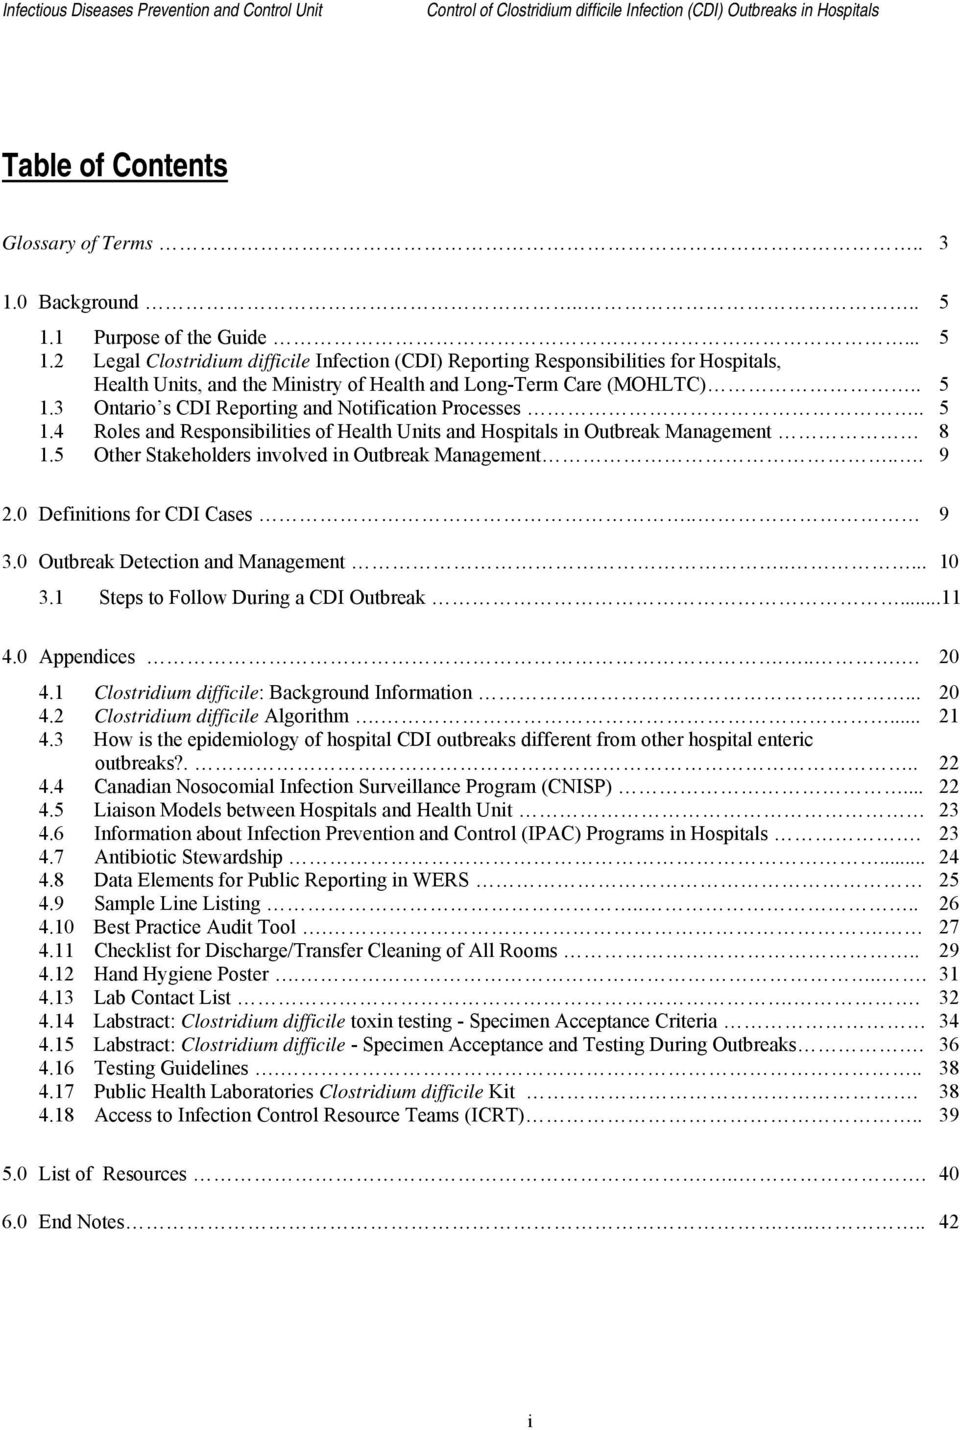 . 5 1.4 Roles and Responsibilities of Health Units and Hospitals in Outbreak Management 8 1.5 Other Stakeholders involved in Outbreak Management... 9 2.0 Definitions for CDI Cases.. 9 3.